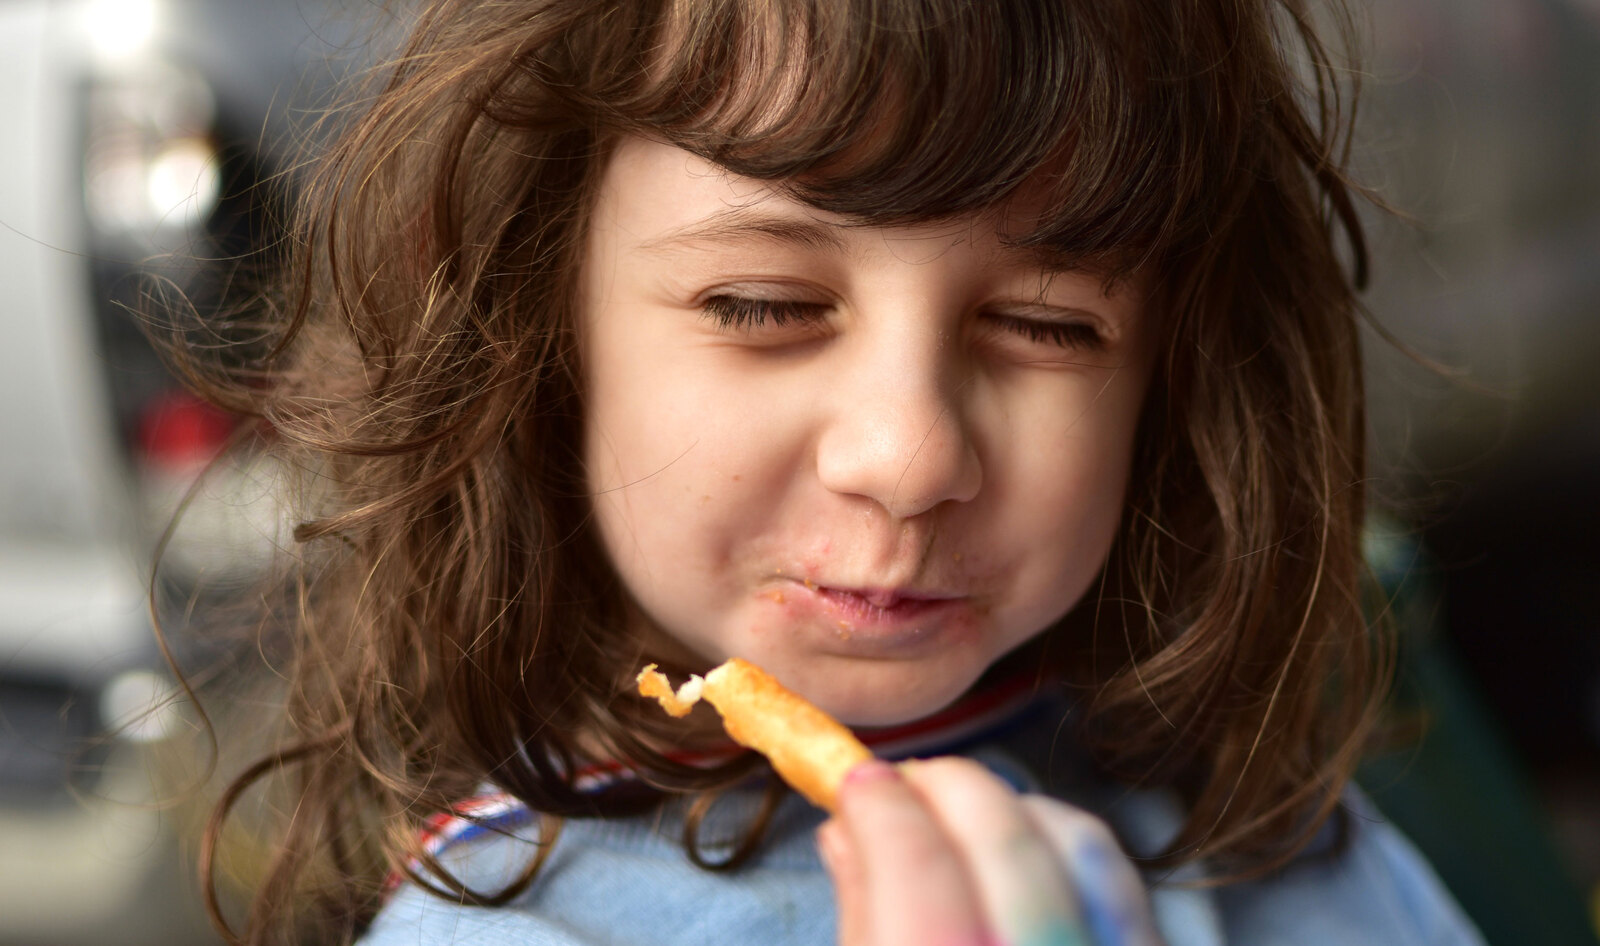 New Research on Kids and Vegetables Shows the Power of the Potato